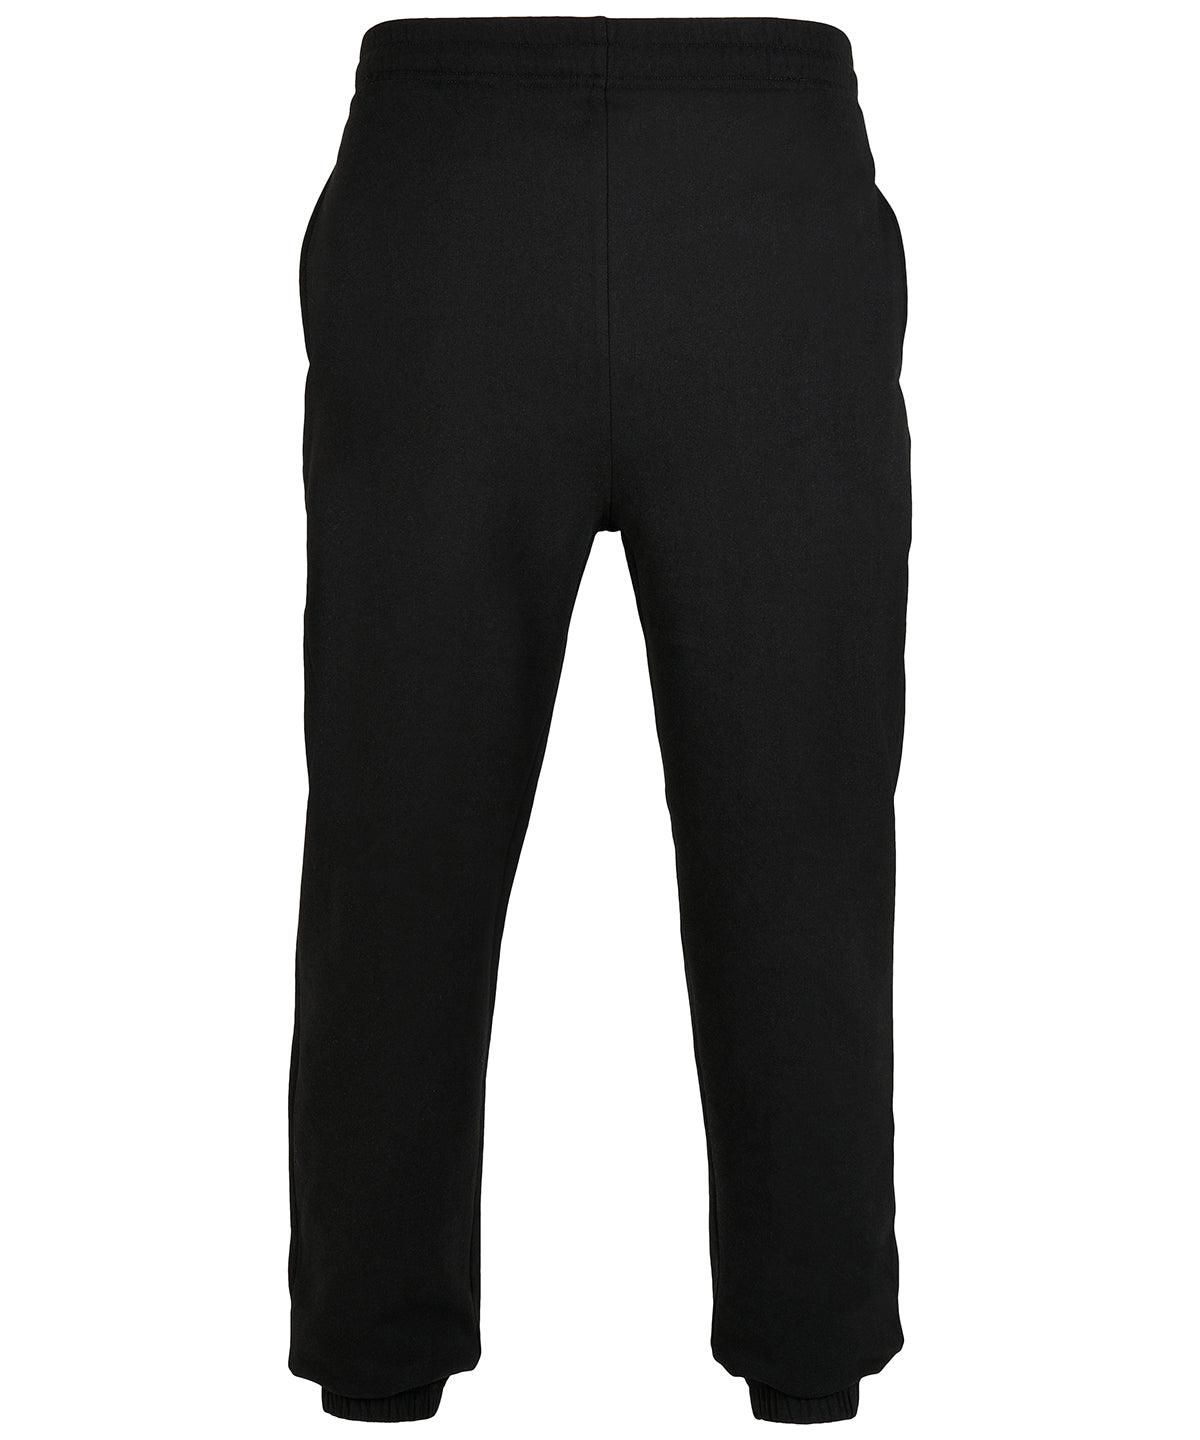 Black* - Basic sweatpants Sweatpants Build Your Brand Basic Co-ords, Joggers, Lounge Sets, New For 2021, New Styles For 2021, Plus Sizes, Rebrandable, Trending Schoolwear Centres